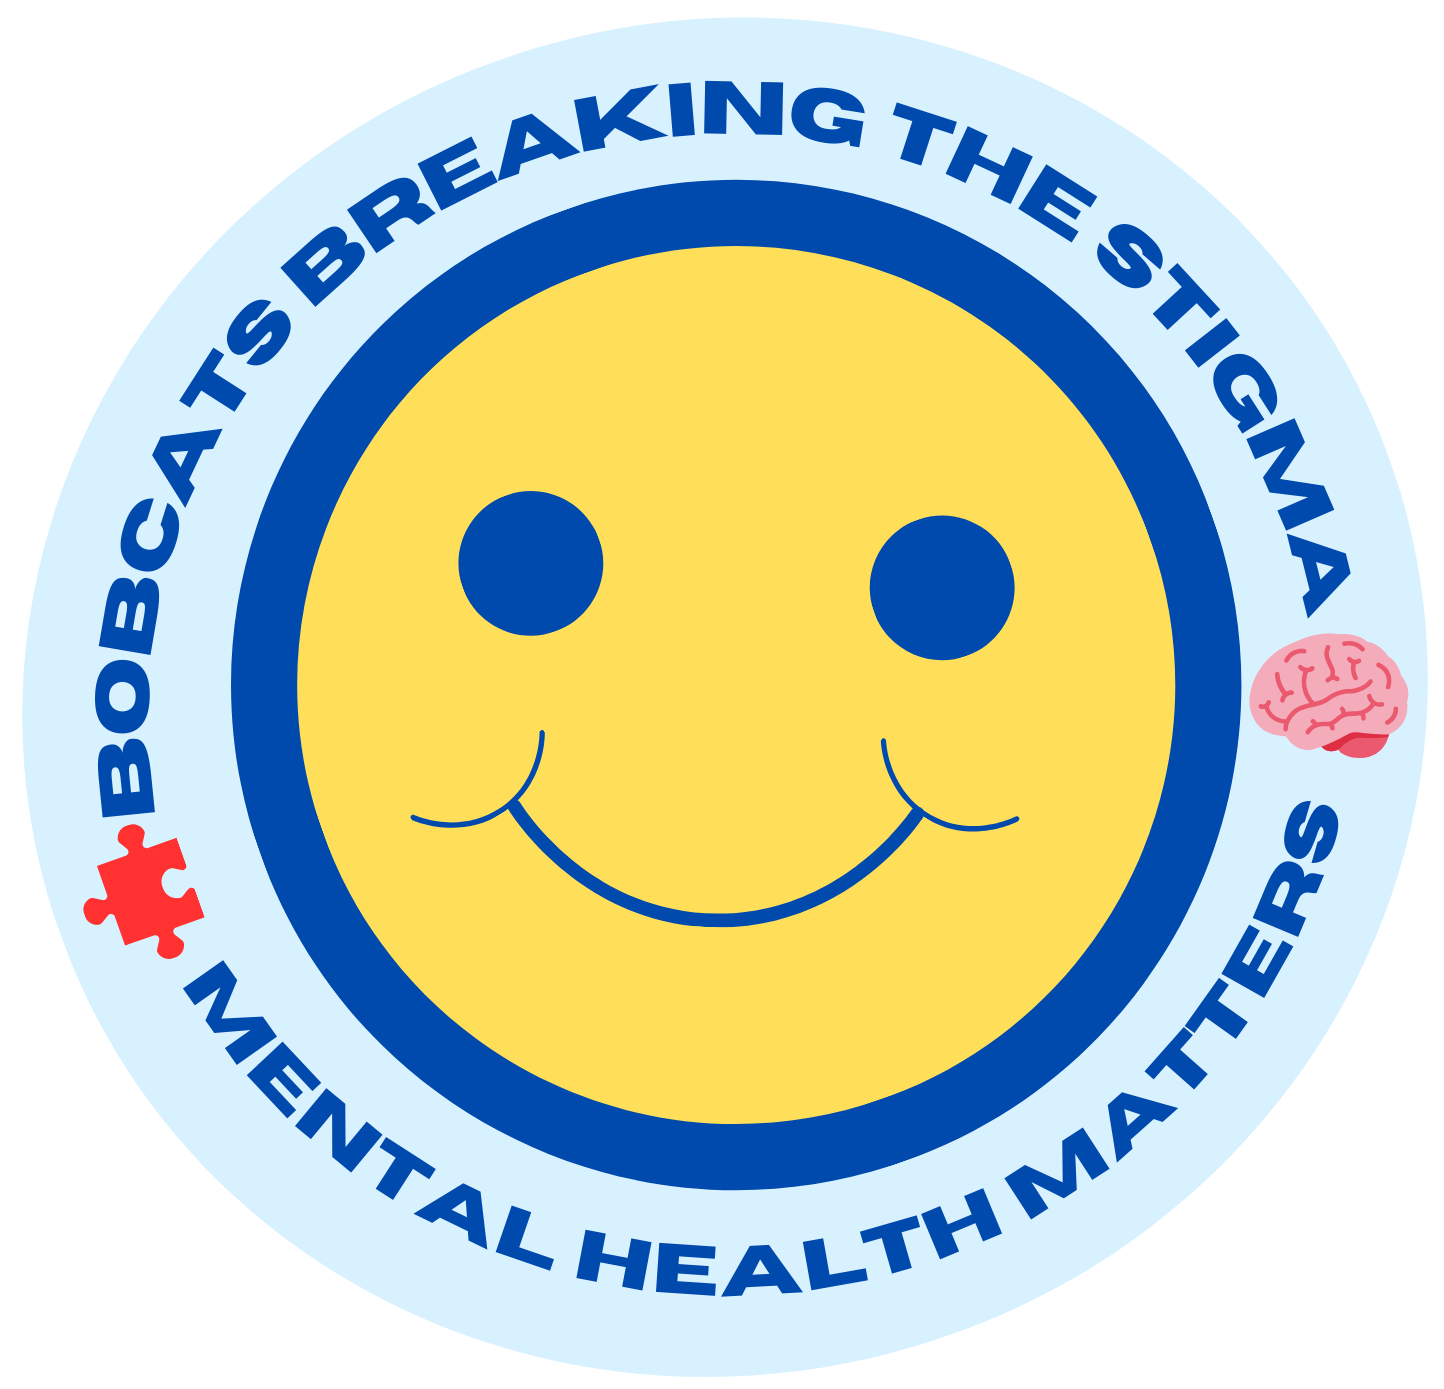 Logo with the text "Bobcats Breaking The Stigma, Mental Health Matters" in a circular pattern around a yellow smiling face. There is a red puzzle piece and pink brain separating the text.